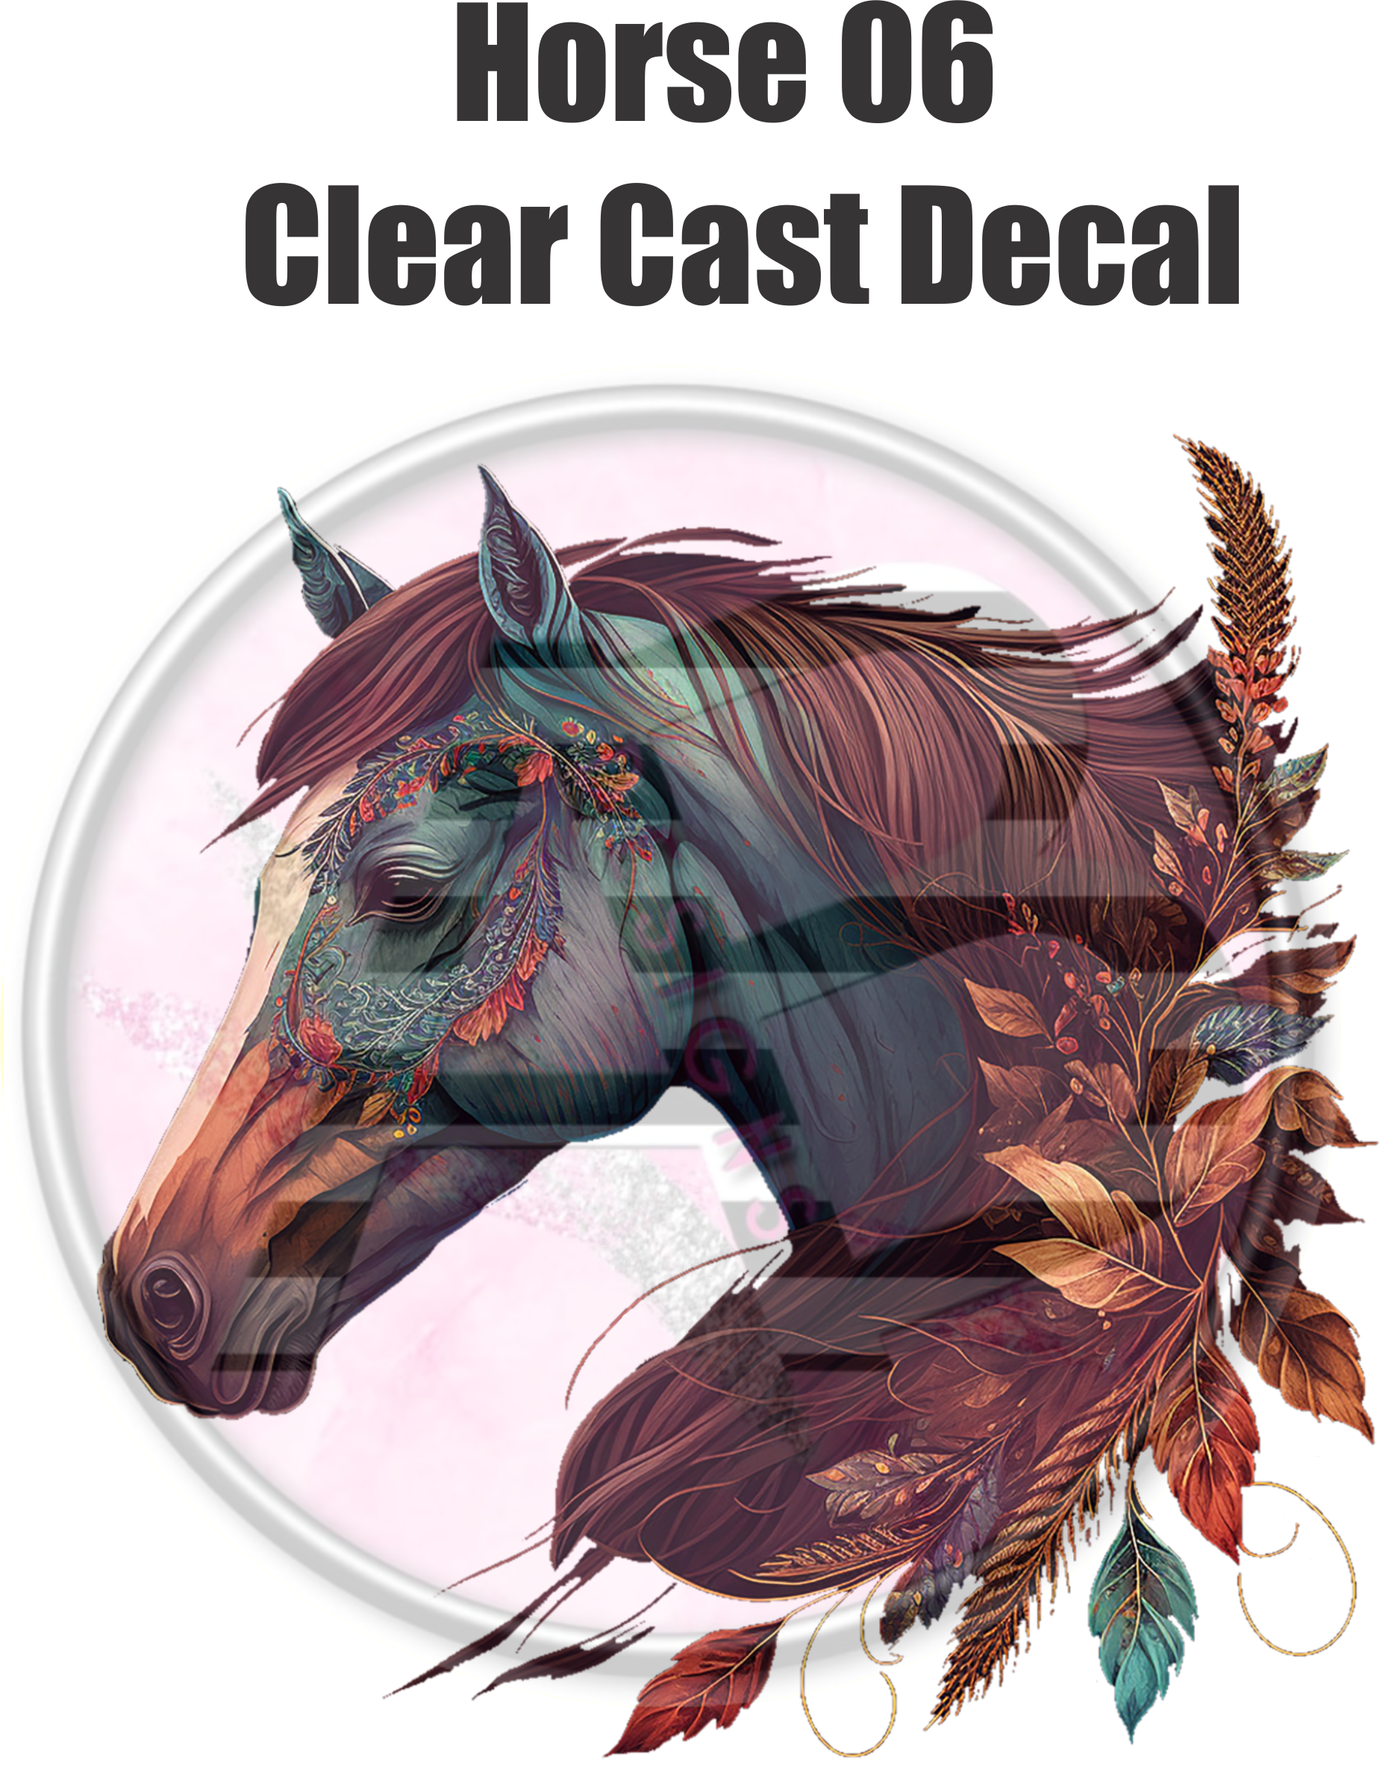 Horse 06 - Clear Cast Decal